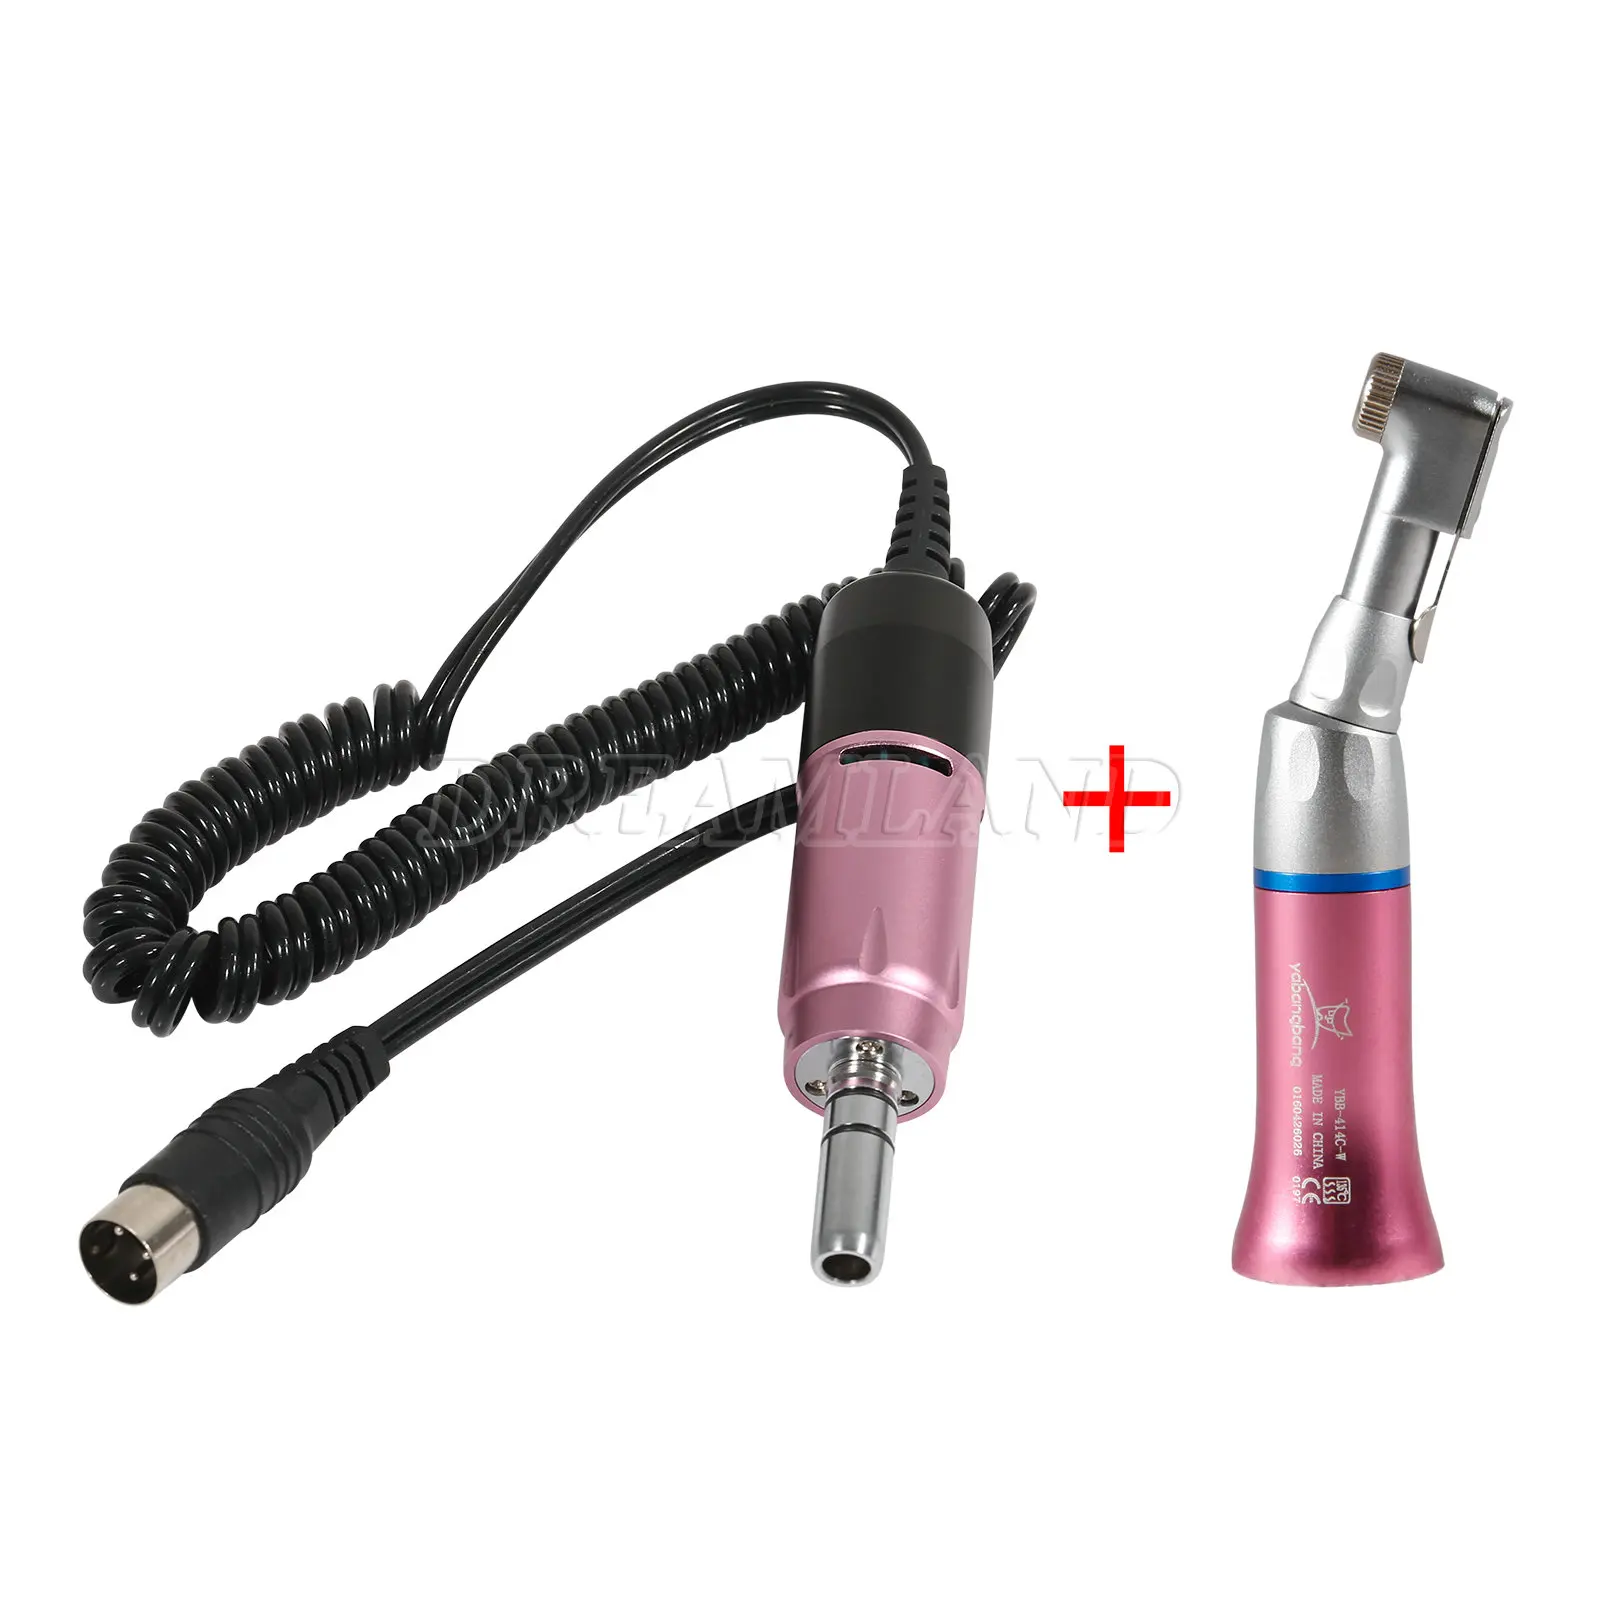 35K RPM Electric Micro E-Type Motor Handpiece DC 30V PINK Fit Dental Lab Marathon III Polisher N2 + YP Contra Angle Handpiece